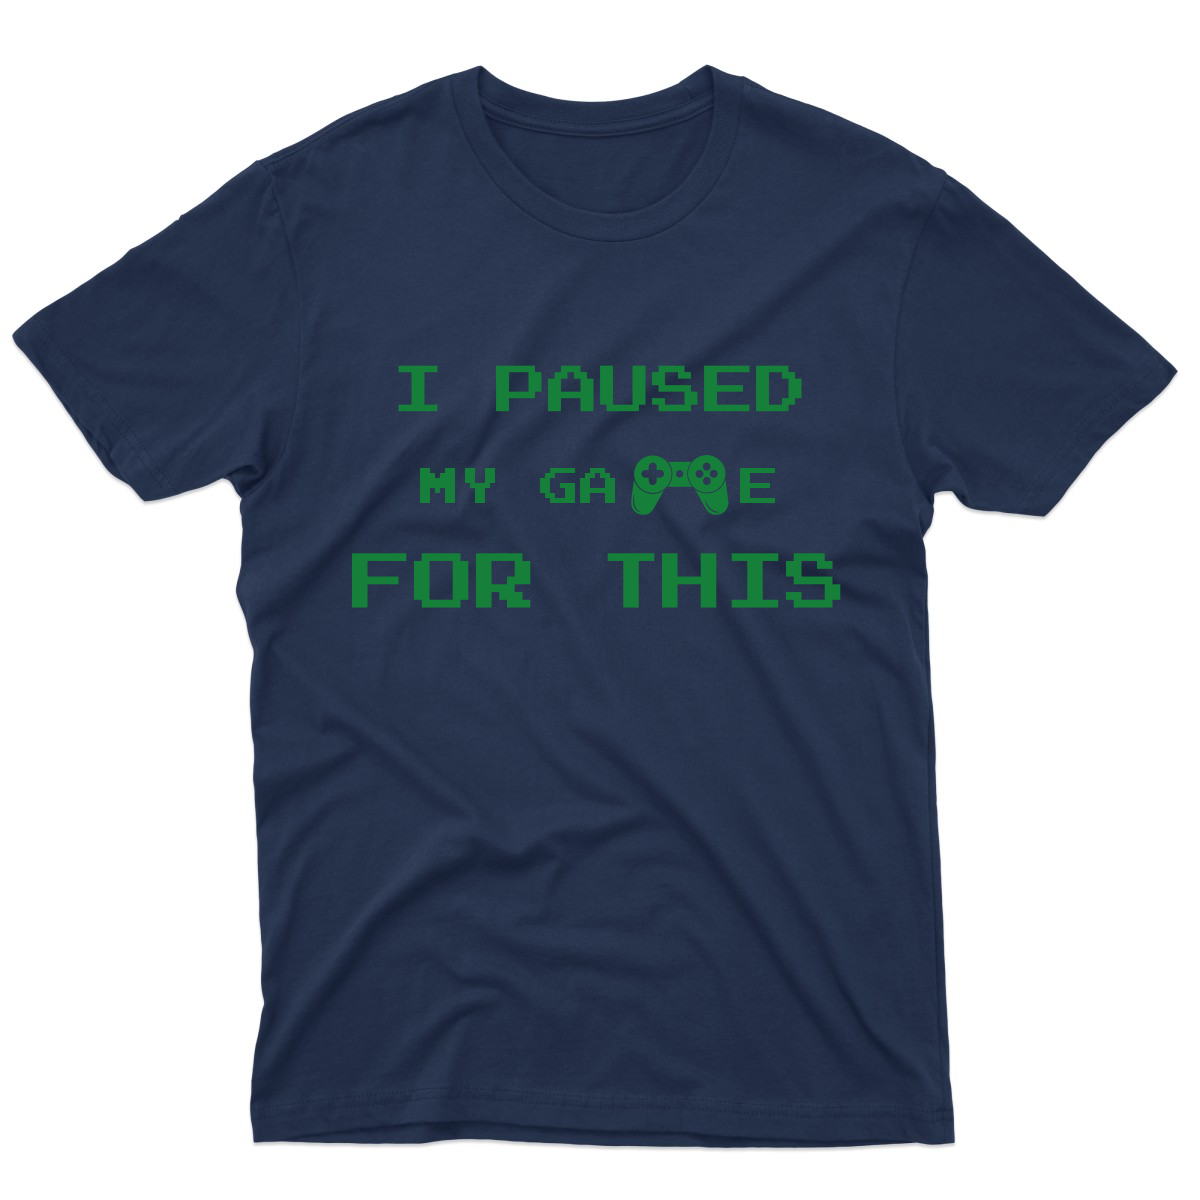 I Paused My Game For This Men's T-shirt | Navy